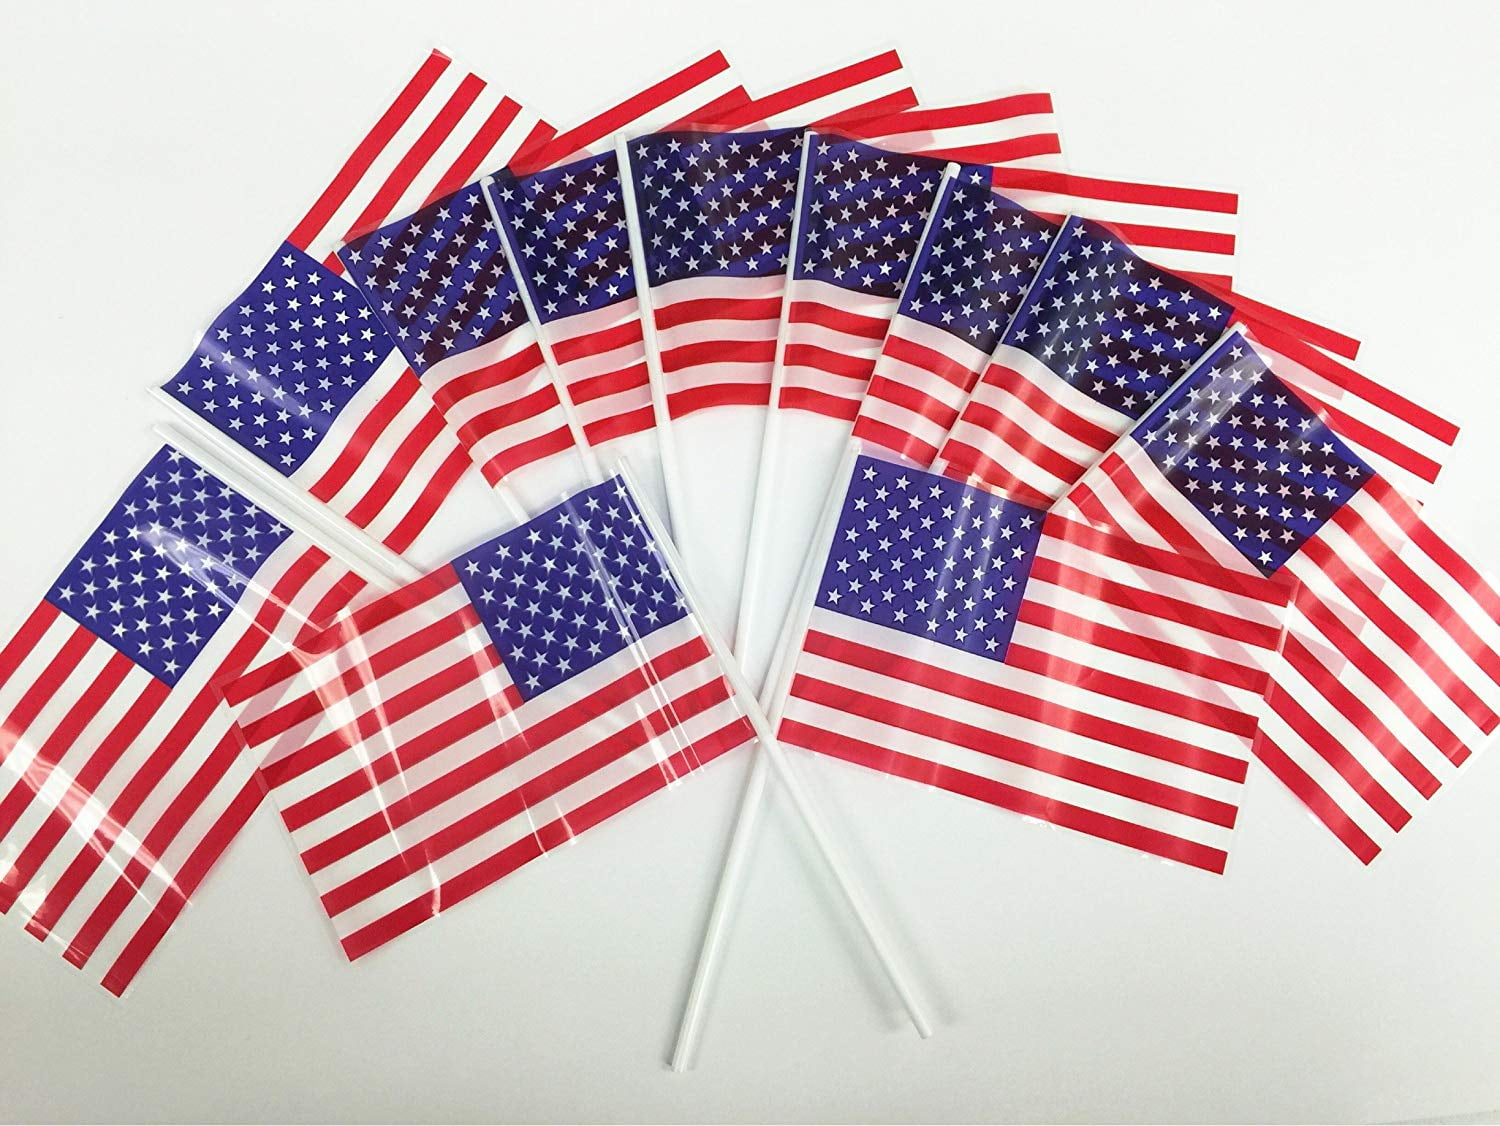 Small American Flags 4x6 Inch/Smal GIFTEXPRESS Set of 12 Proudly Made in U.S.A 